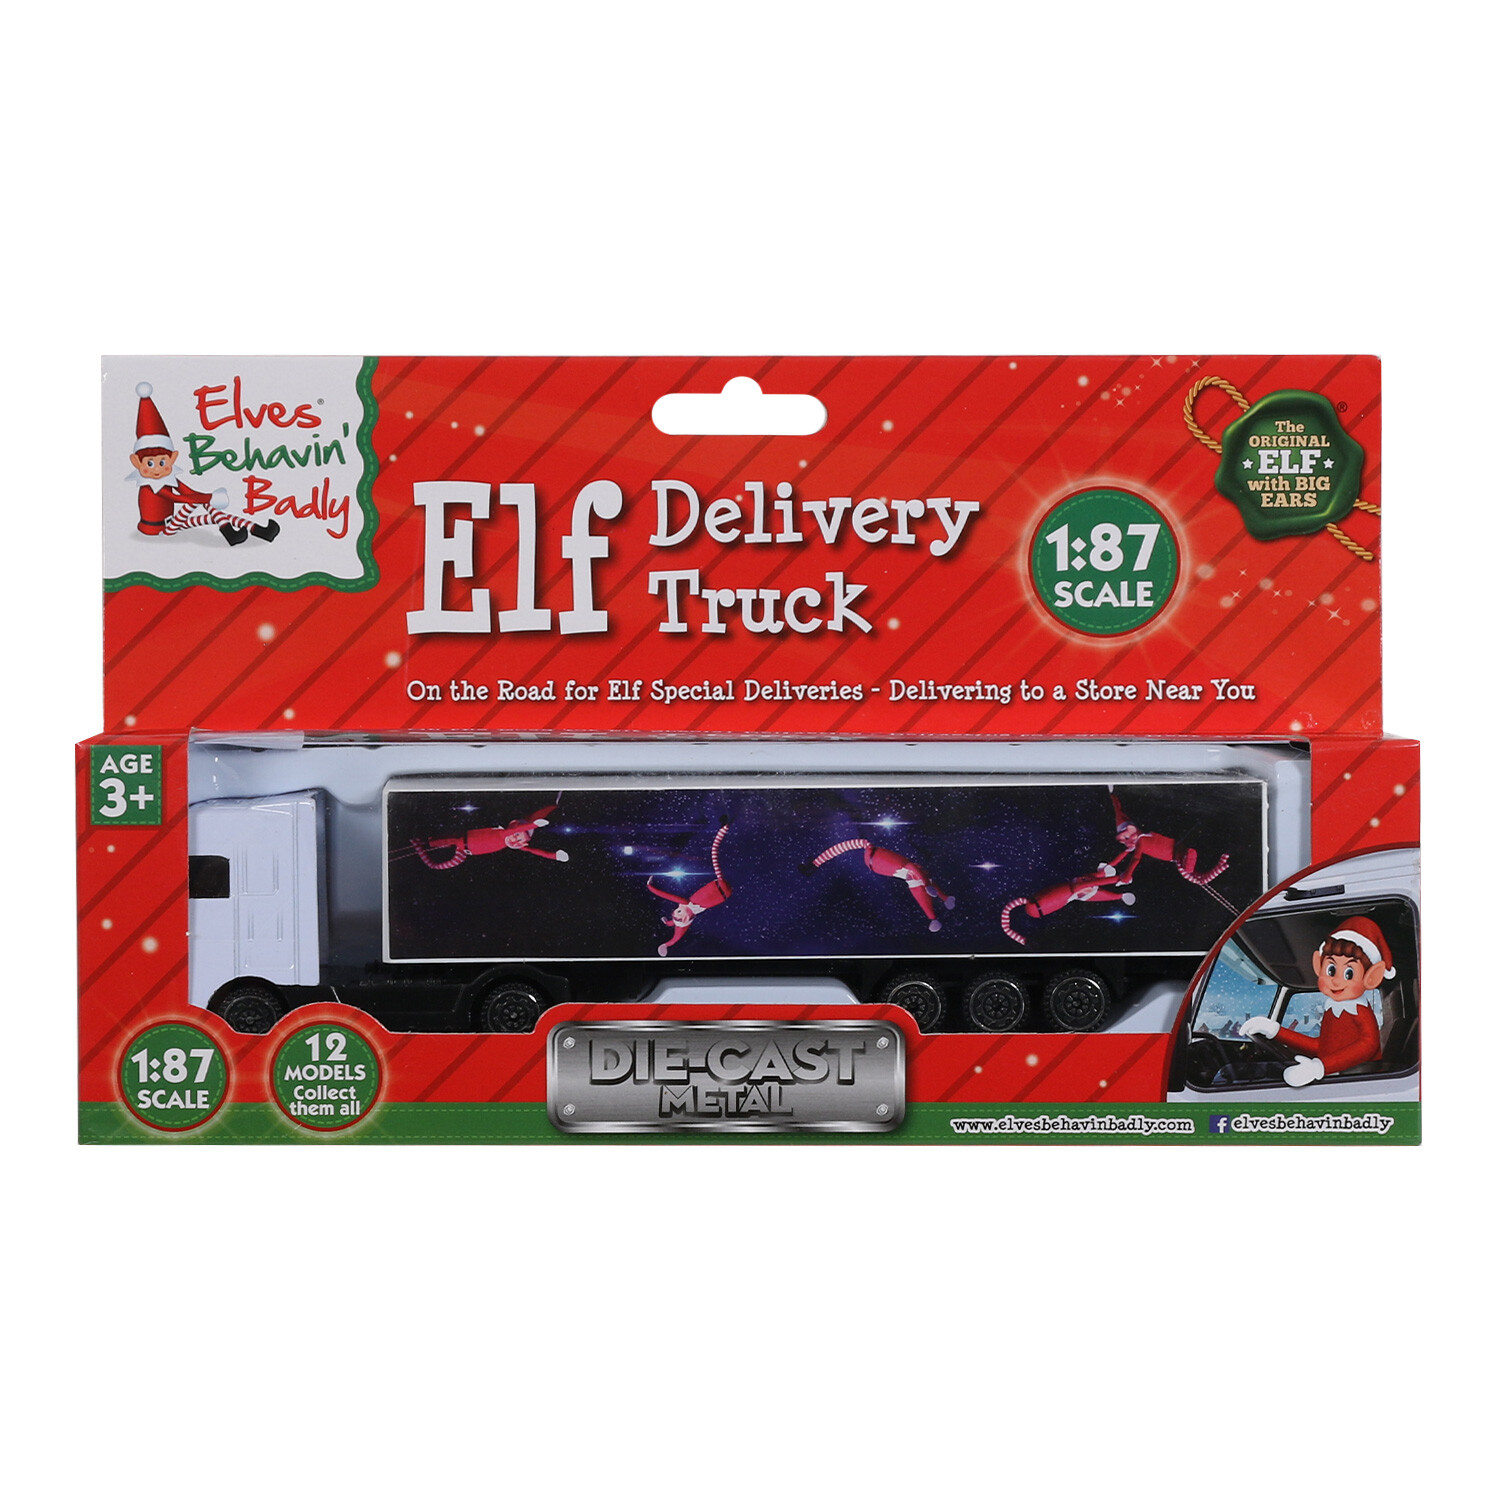 Elf Delivery Truck Image 9